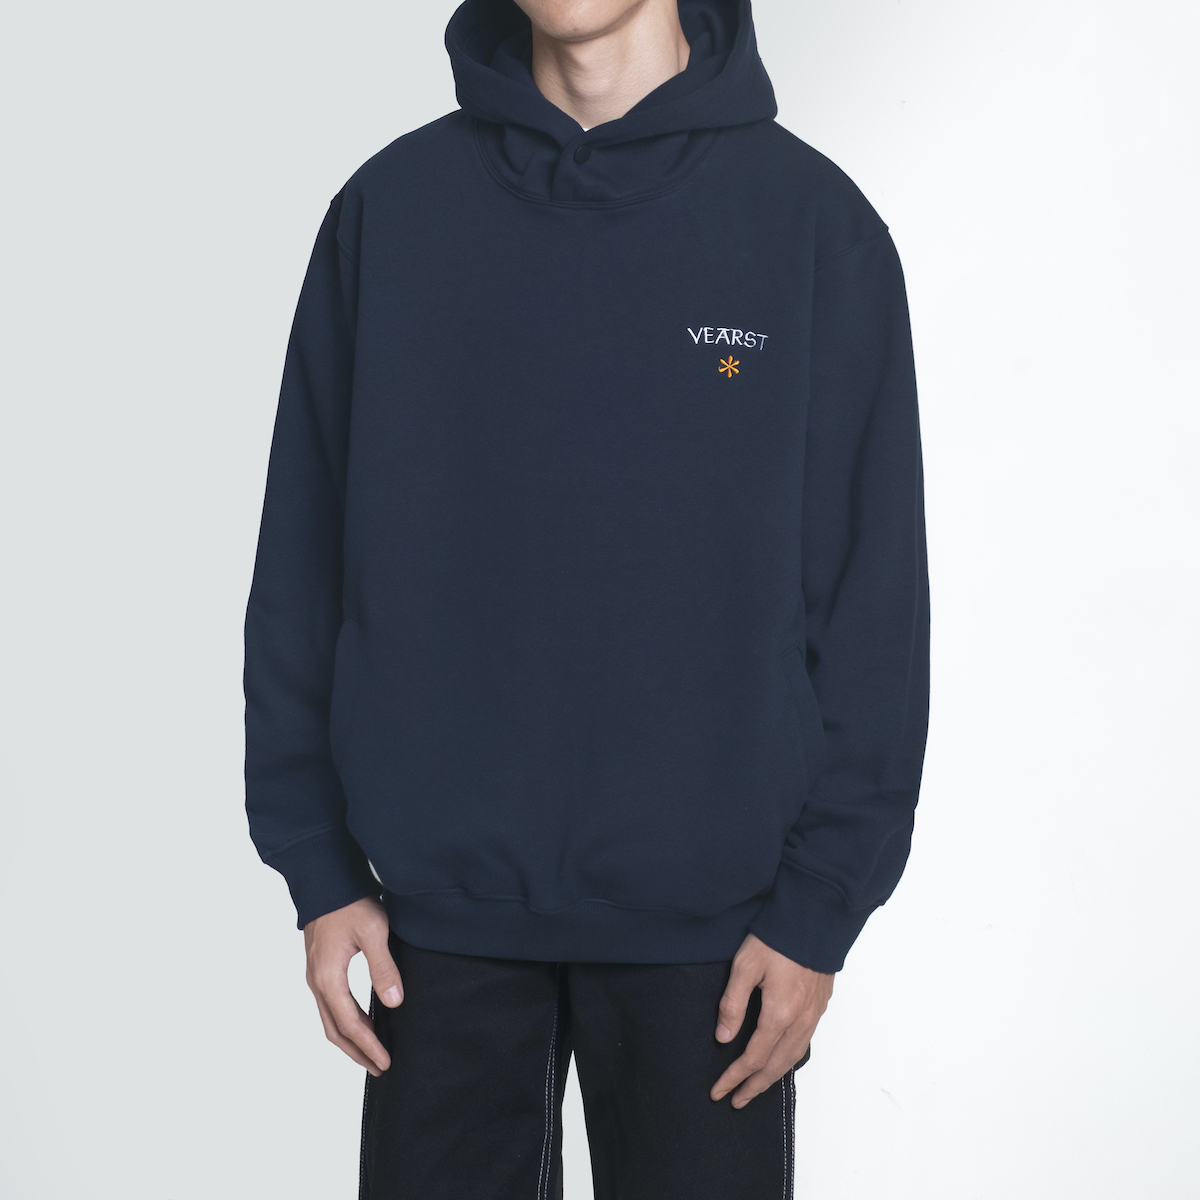 Cole Navy Pullover Hoodie